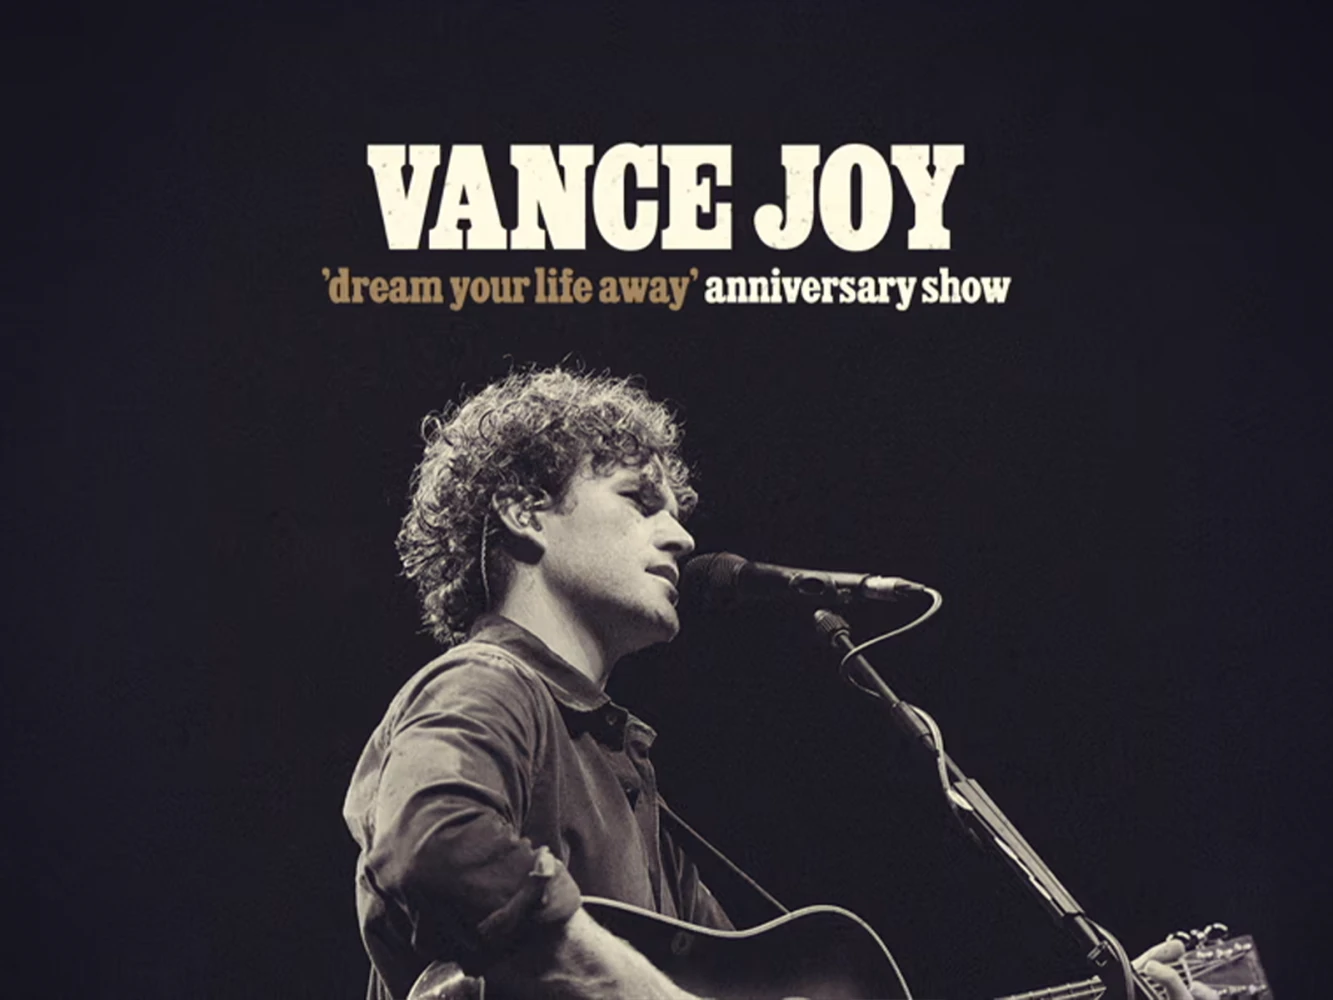 Vance Joy "dream your life away" 10-Year Anniversary Show: What to expect - 1